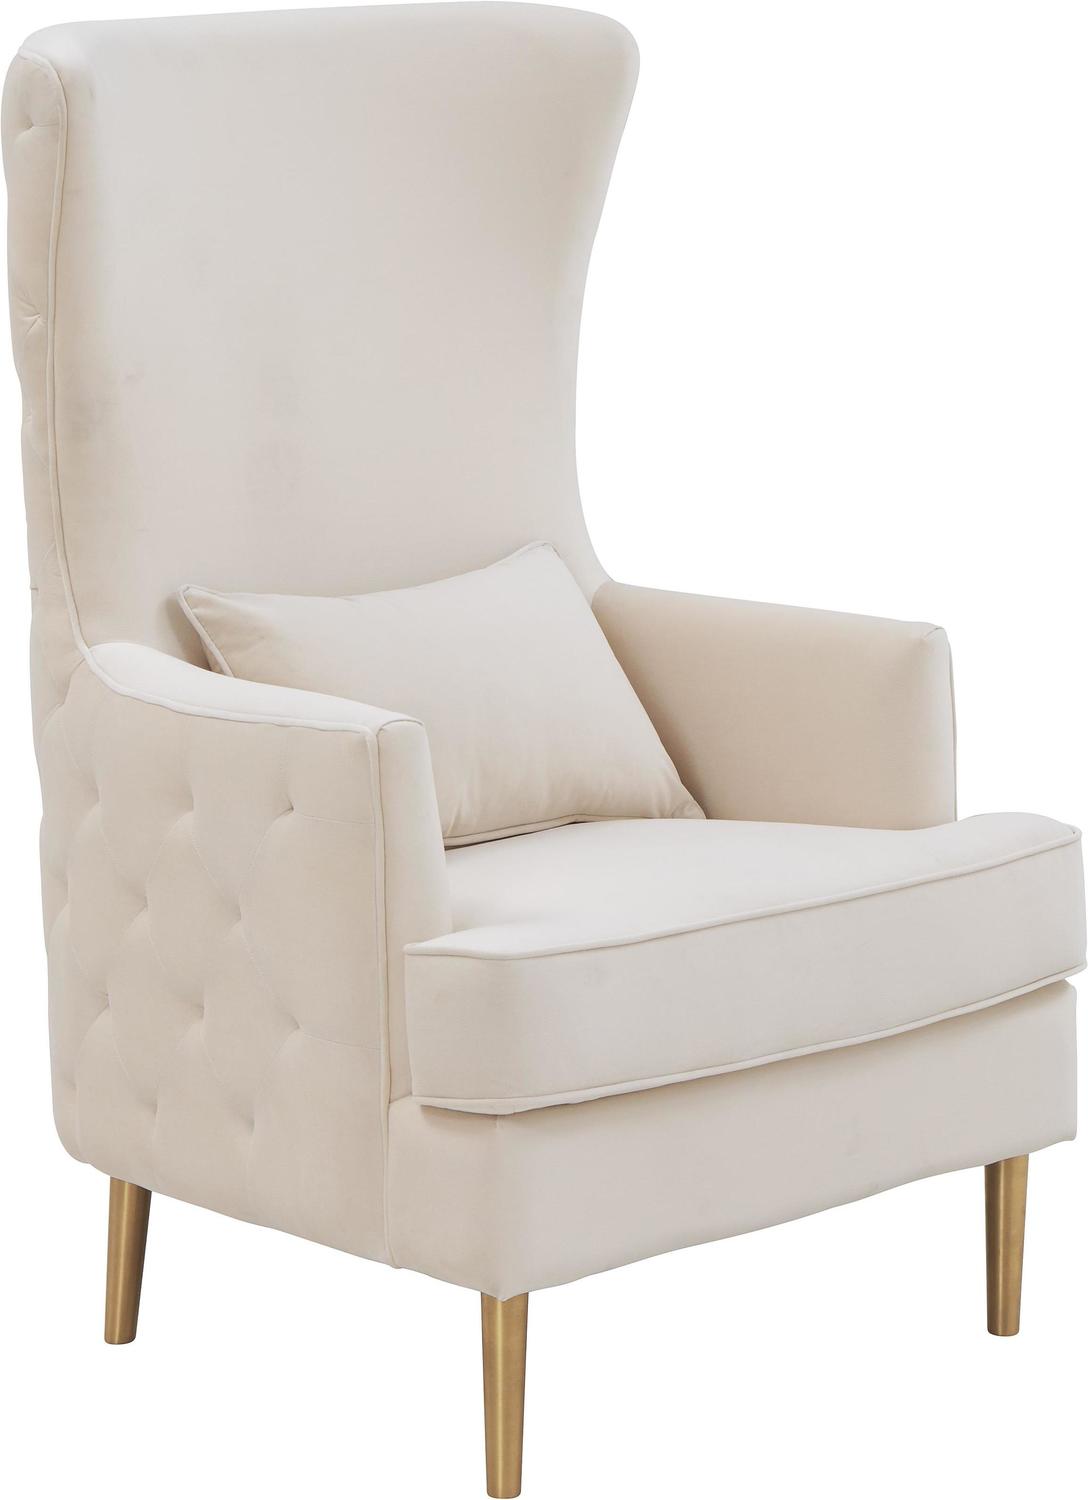 single chaise lounge chair Contemporary Design Furniture Accent Chairs Cream